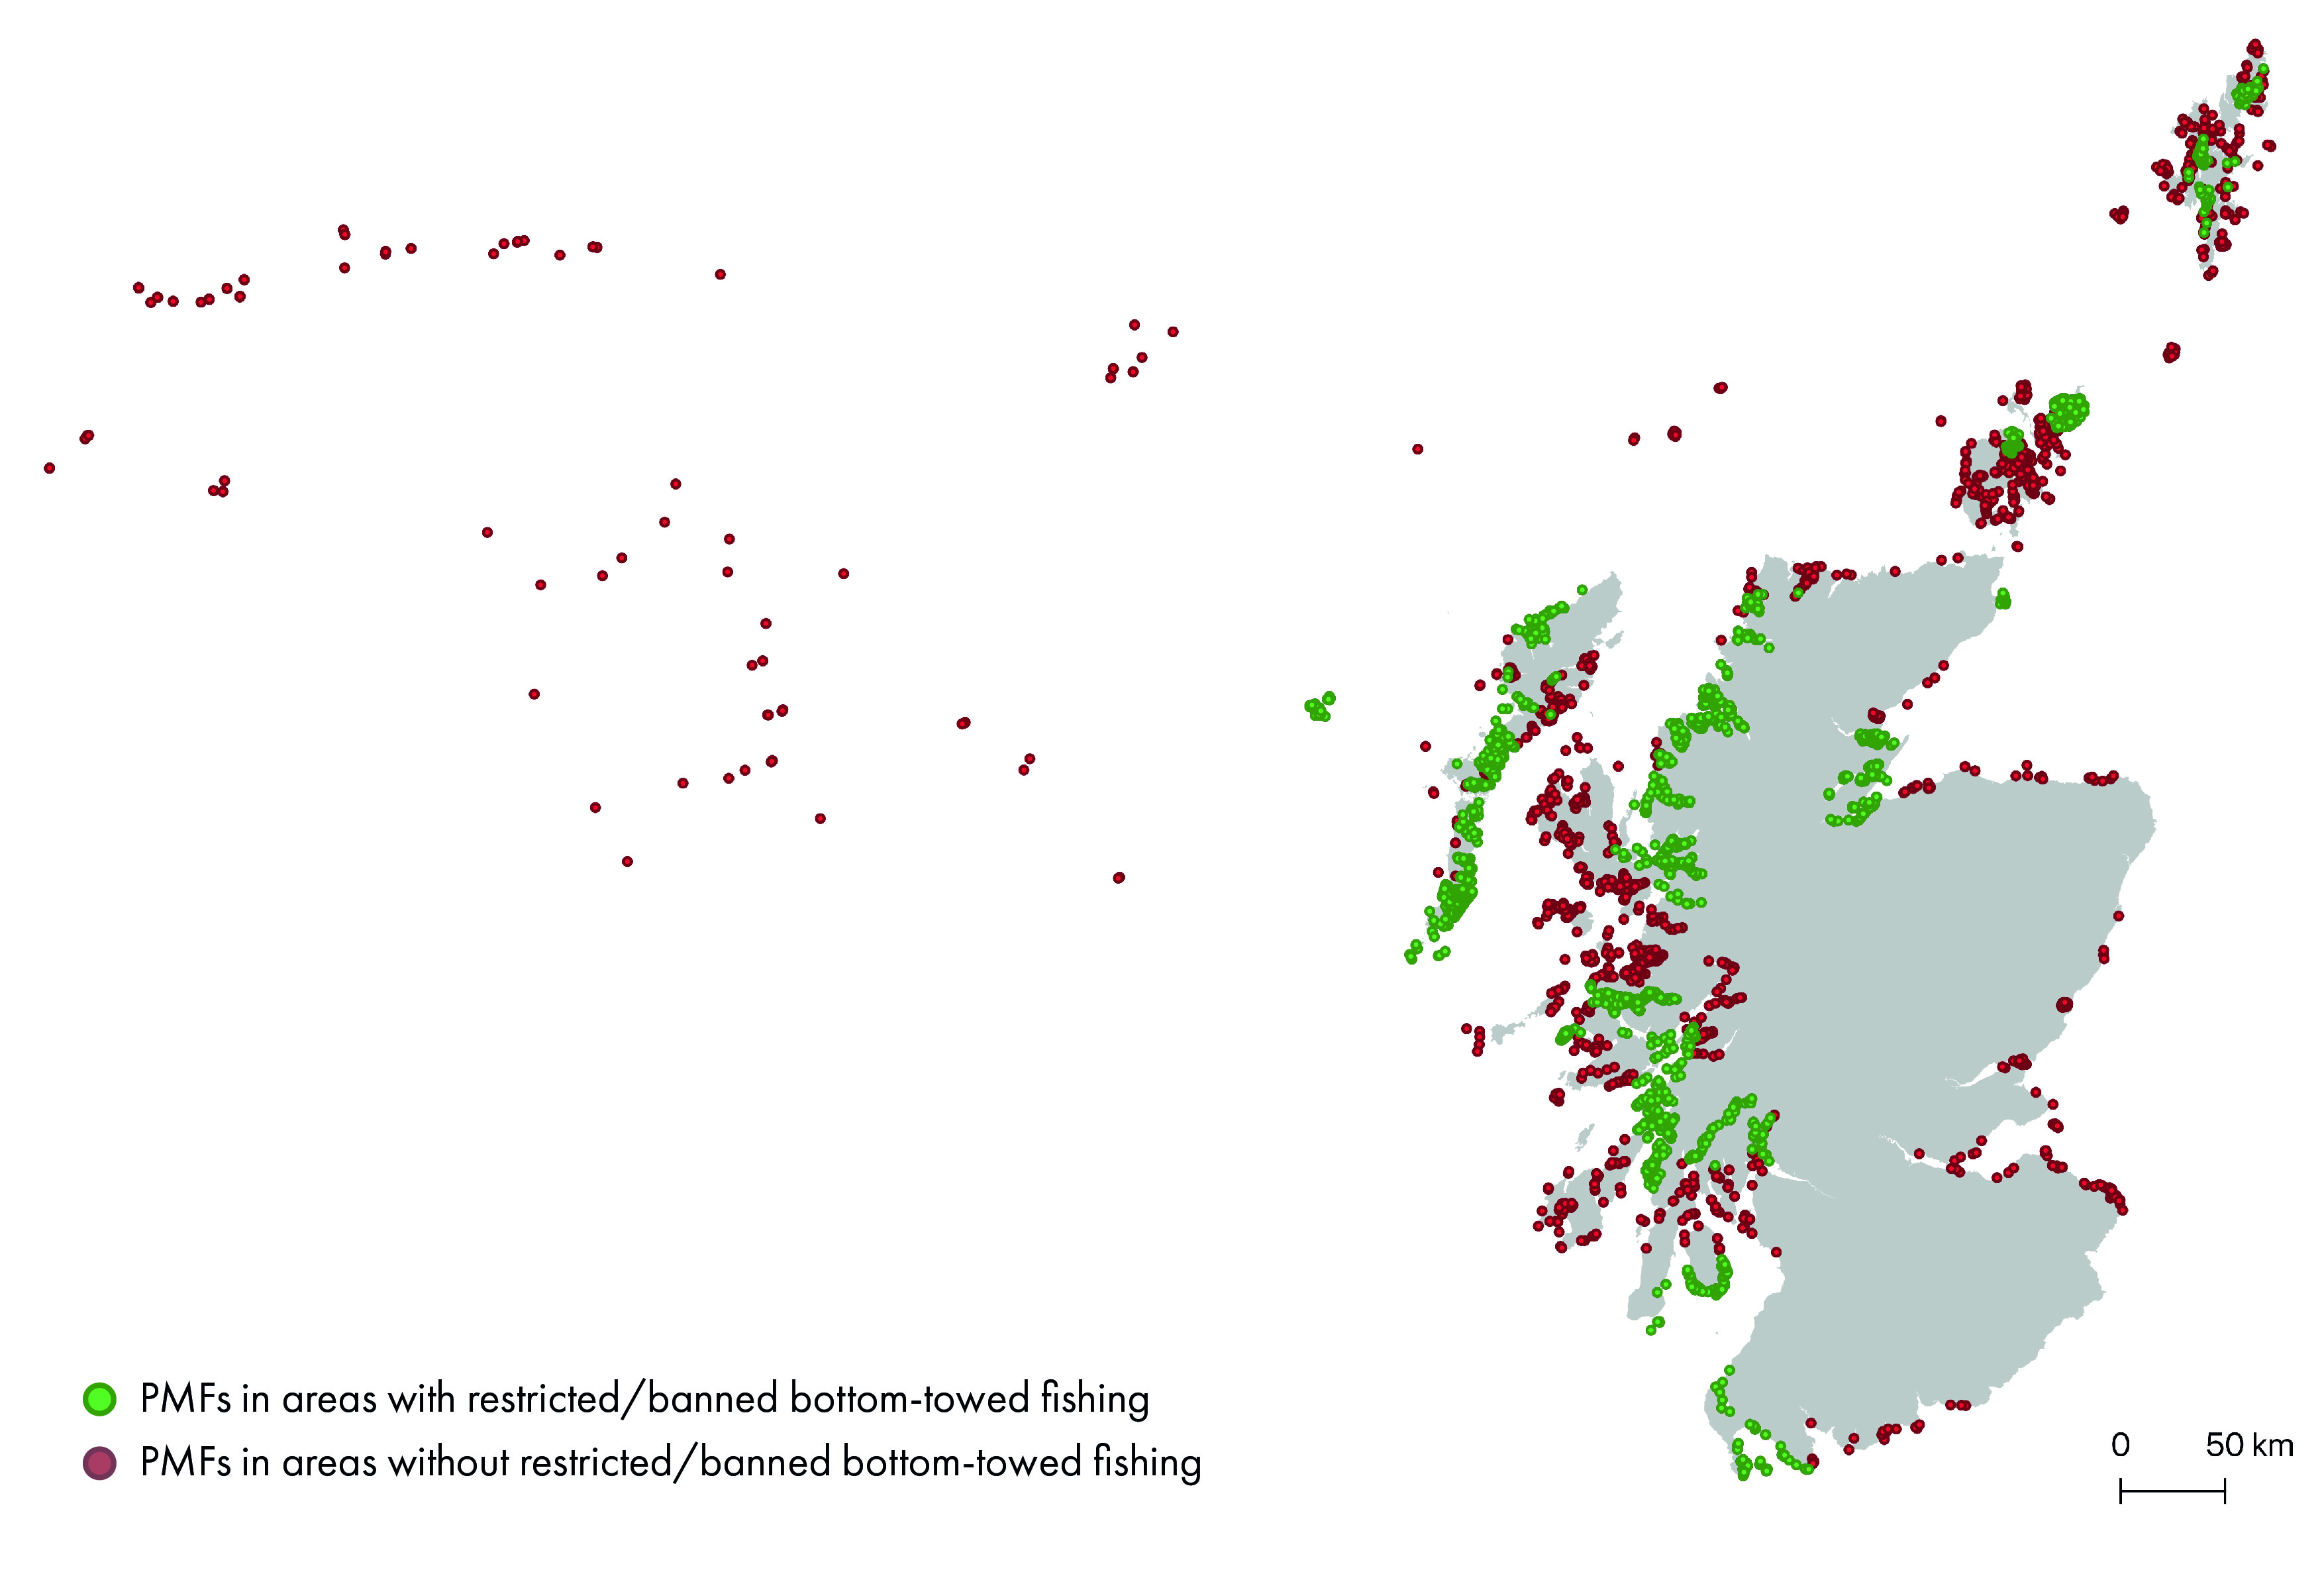 Map of Scotland's seas showing Priority Marine Features (PMFs) in areas where bottom-towed fishing is restricted in green, and in areas where trawling/dredging is not restricted in red. Alongside is an inset map, with a higher resolution showing the type of PMFs which are not in region with restrictions/bans on bottom-towed fishing - indicating that a high proportion of kelp beds are in regions without restrictions on bottom-towed fishing.